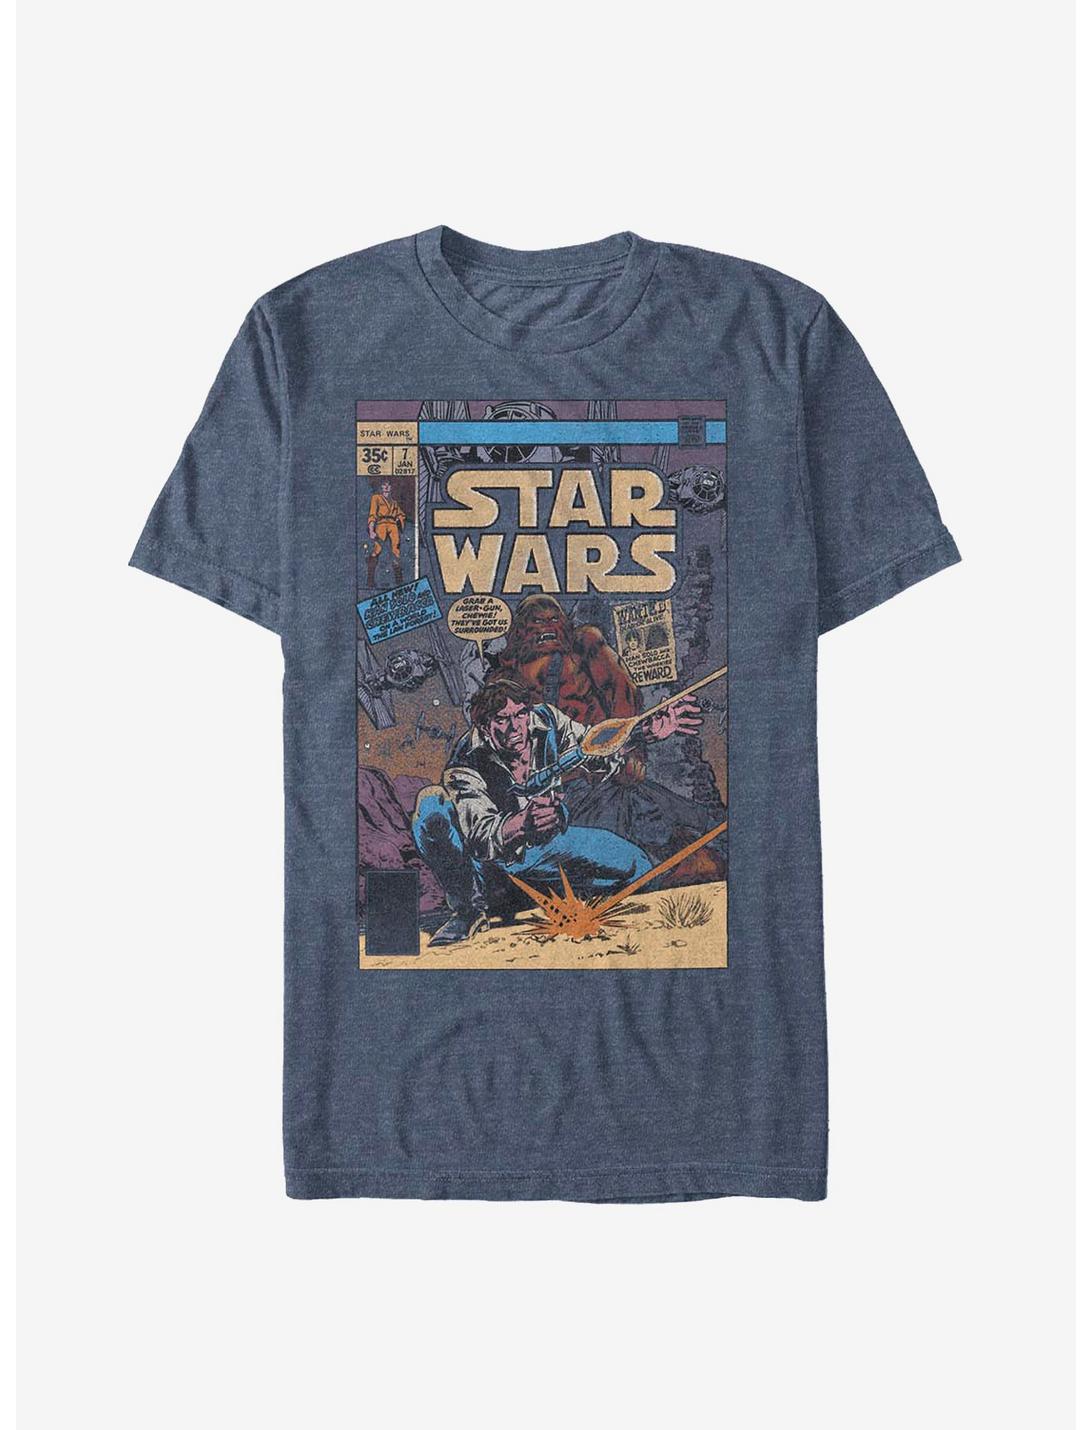 STAR WARS Mens Comic Book Cover January 1978 Han Solo and Chewbacca T-Shirt